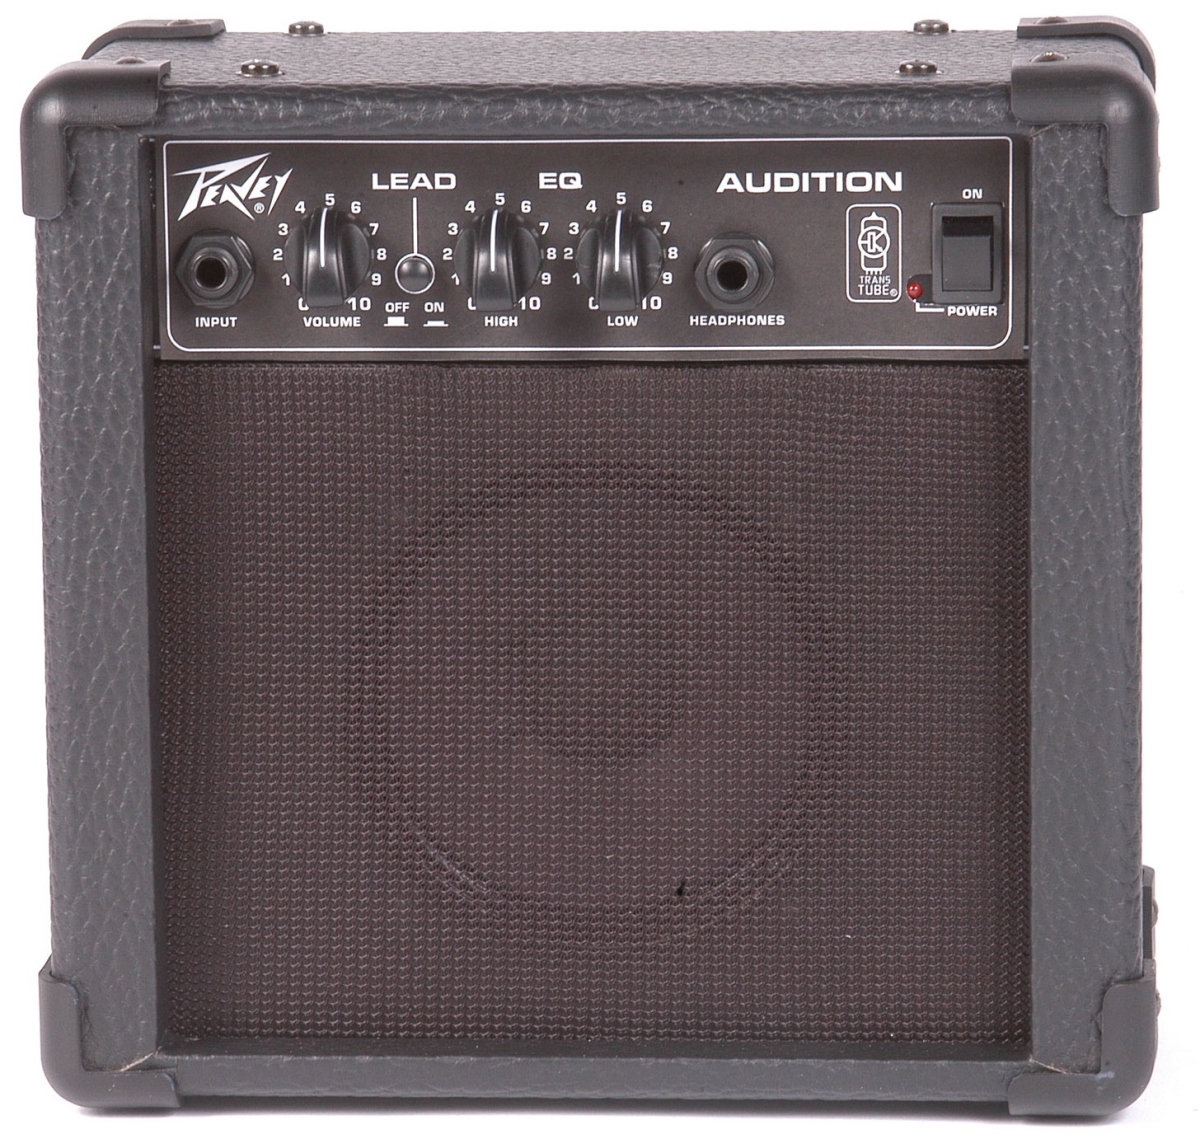 AUDITION Kicking Little Practice Amplifier for Guitars with Overdrive Channel -  Peavey Electronics